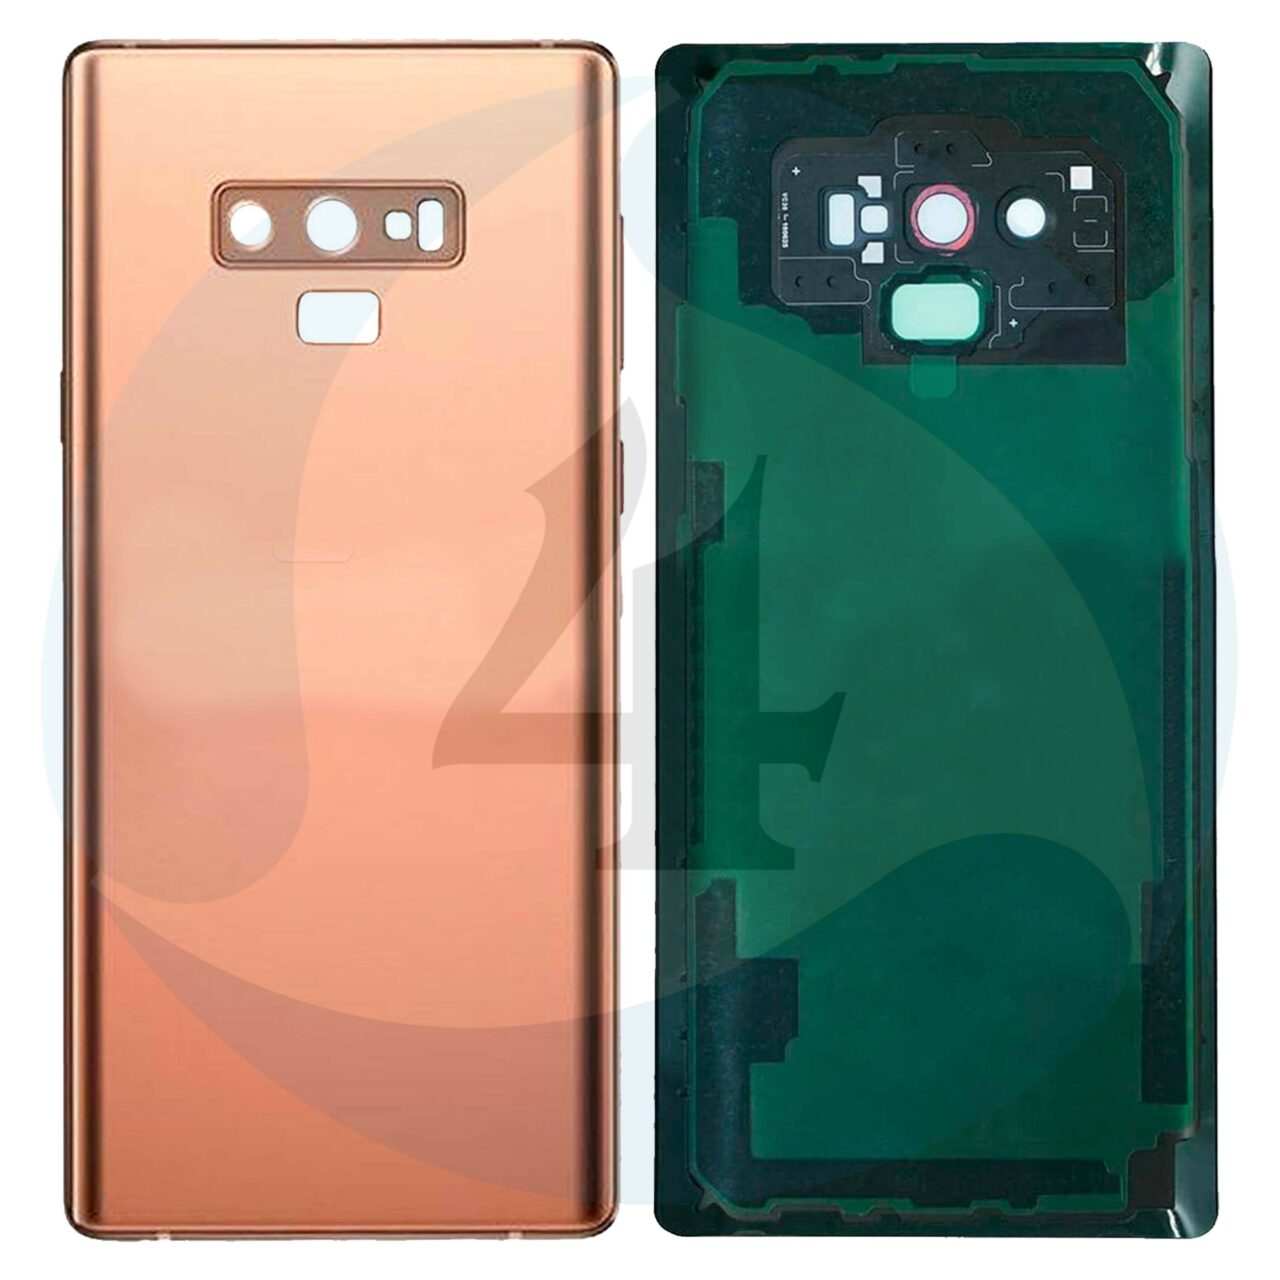 Replacement for samsung galaxy note 9 sm n960 back cover metallic copper